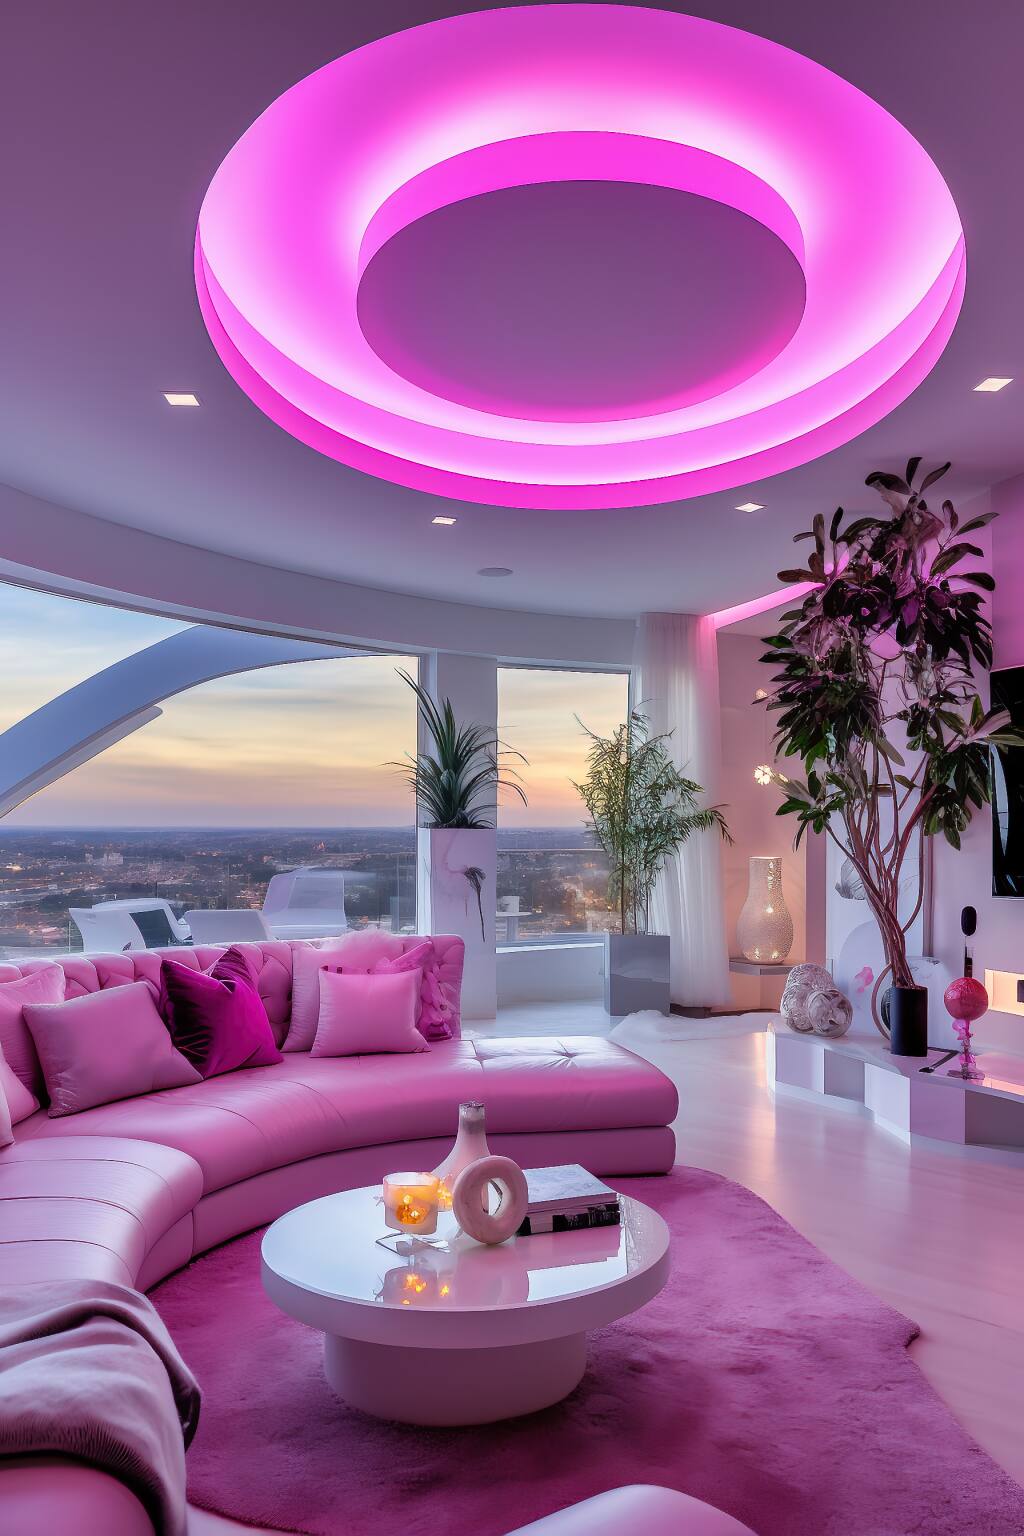 A Modern Living Room With Fuchsia Lighting, Pink Sofas, And A Panoramic City View At Twilight, Embodying A Romantic Urban Vibe.